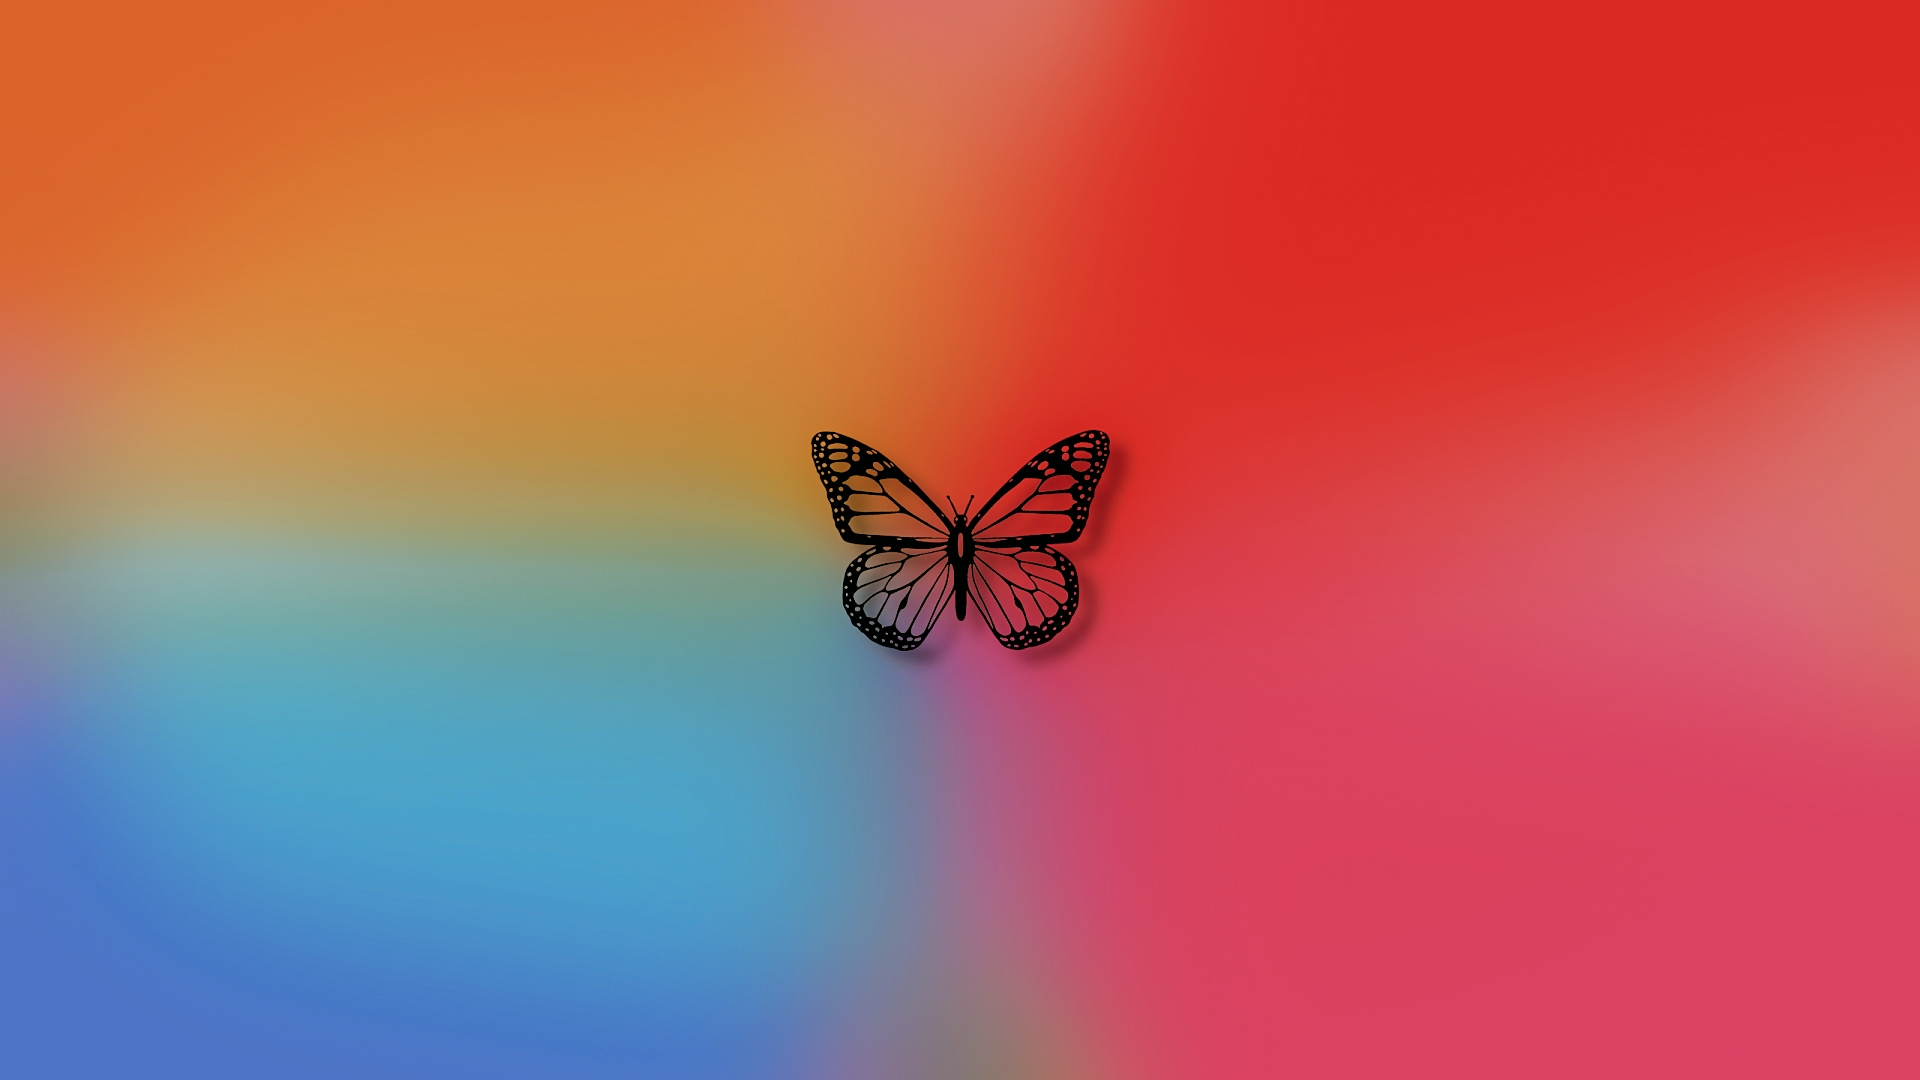 Abstract Butterfly Colorful 1920x1080